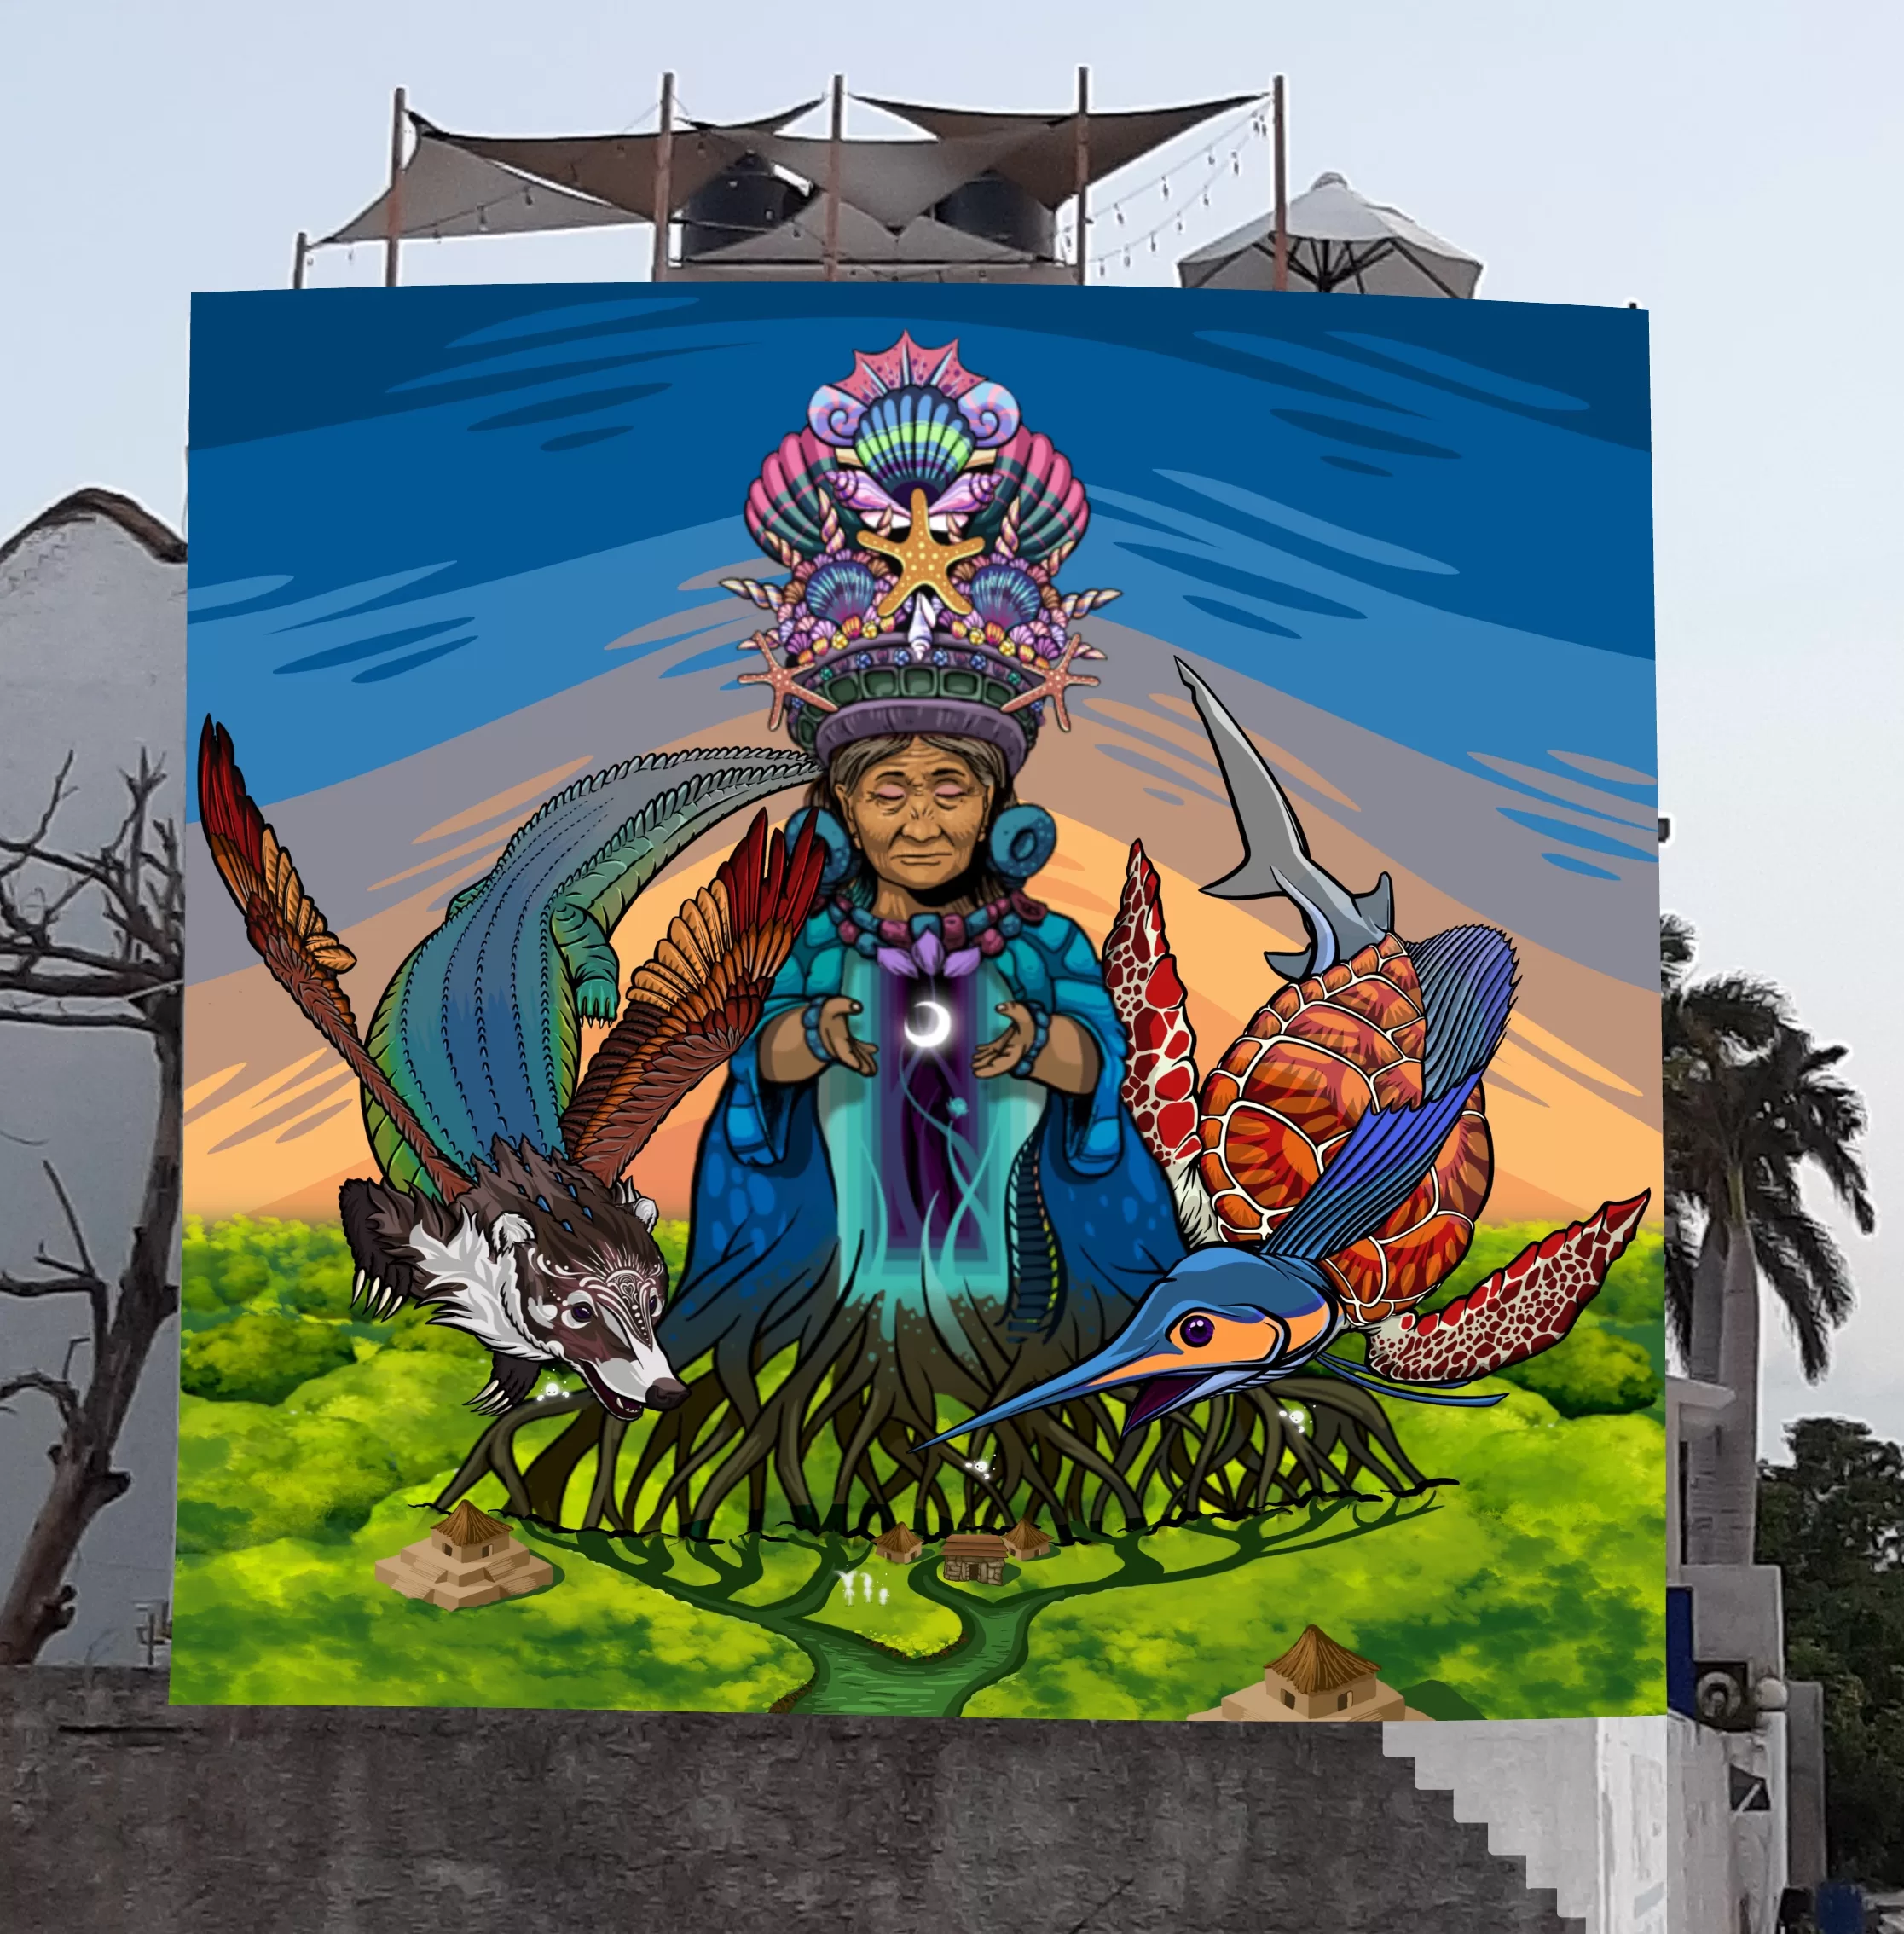 The objective of this mural project is to represent the spirit of Puerto Morelos. She wears a dress made of the mangrove and a crown decorated with the coral reef. From her heart emanates the peace of the crescent moon, illuminating the town with her peaceful light. On her sides there are two mystical guardians, one made by species from the sea and the other from species of the mangrove. They protect and keep this beautiful land safe, while offering a warm welcome to everyone visiting Puerto Morelos.